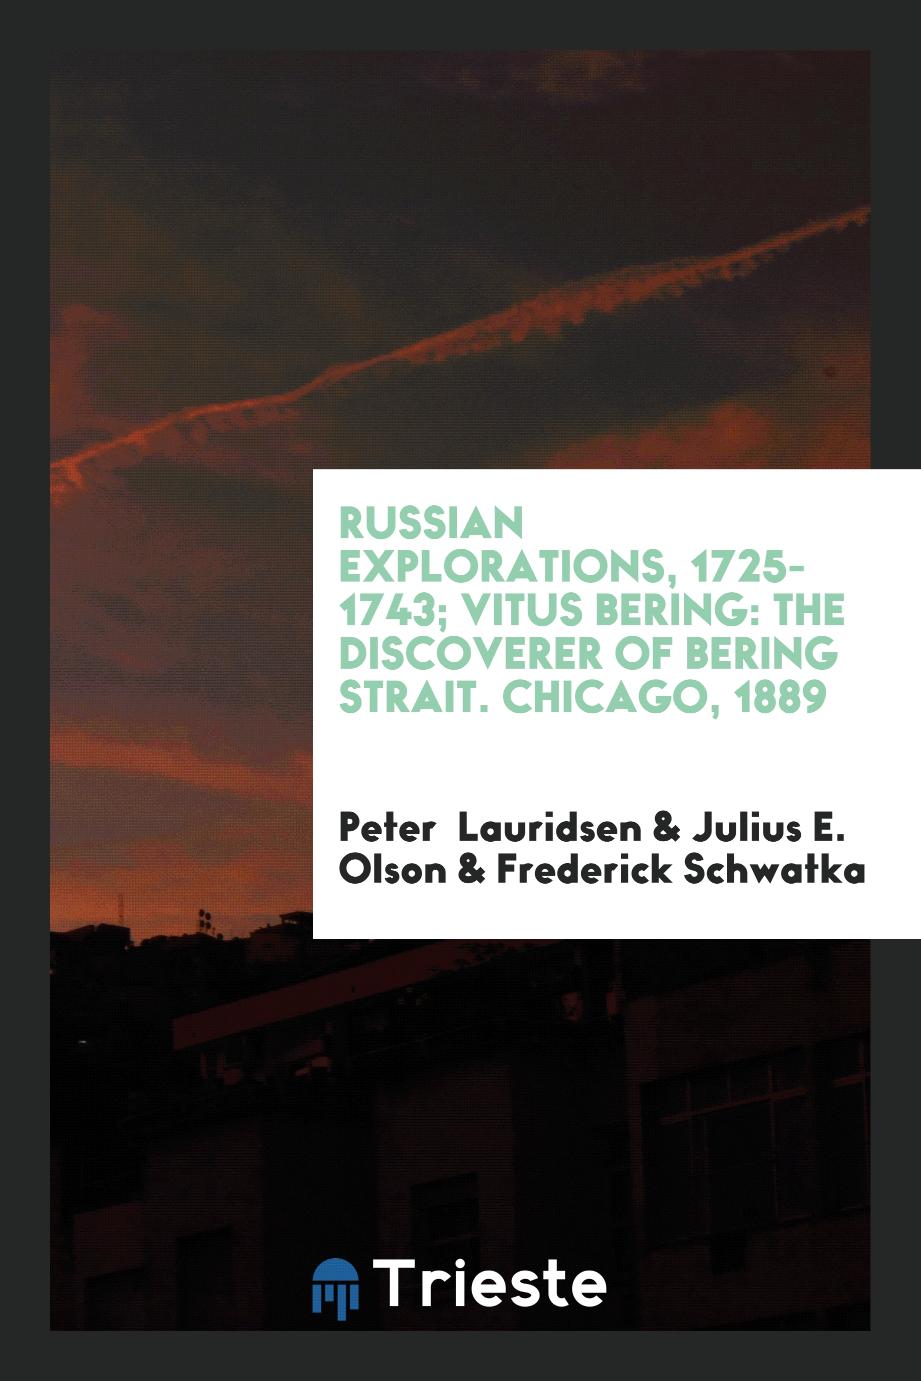 Russian Explorations, 1725-1743; Vitus Bering: The Discoverer of Bering Strait. Chicago, 1889